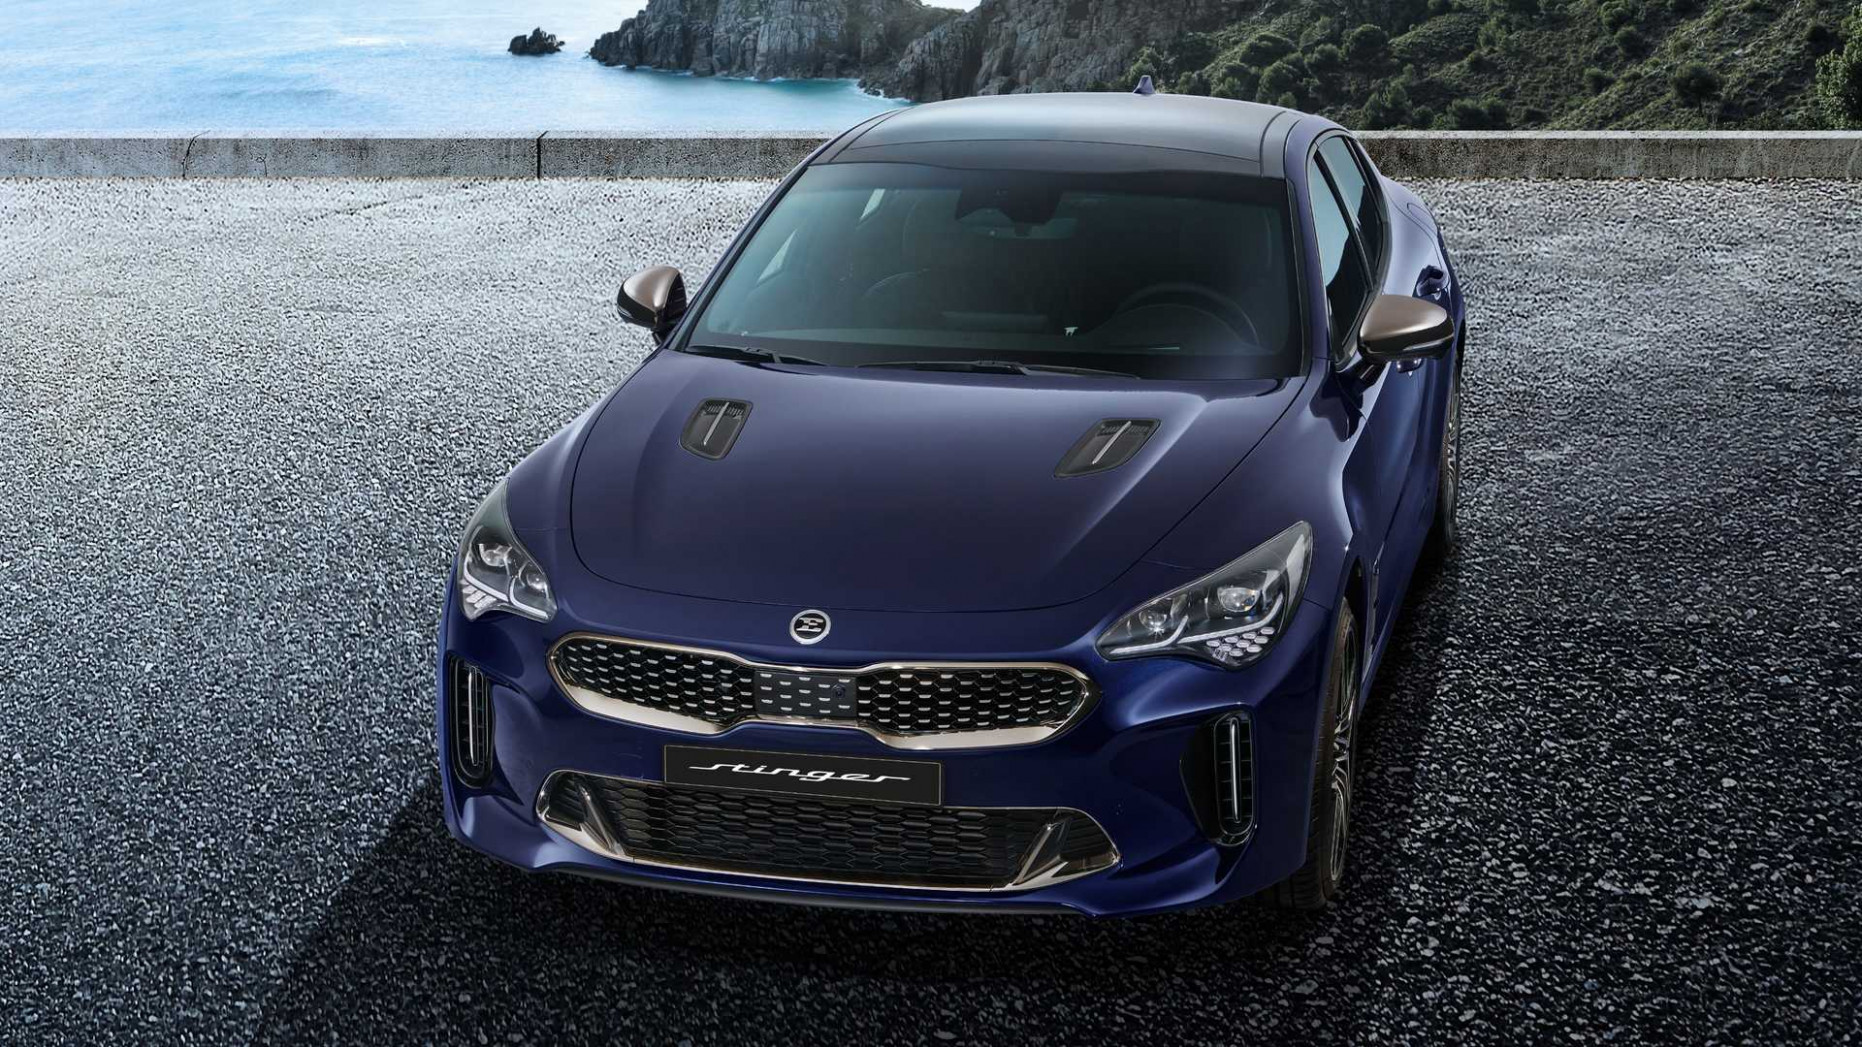 New Model and Performance 2022 Kia Forte Gt